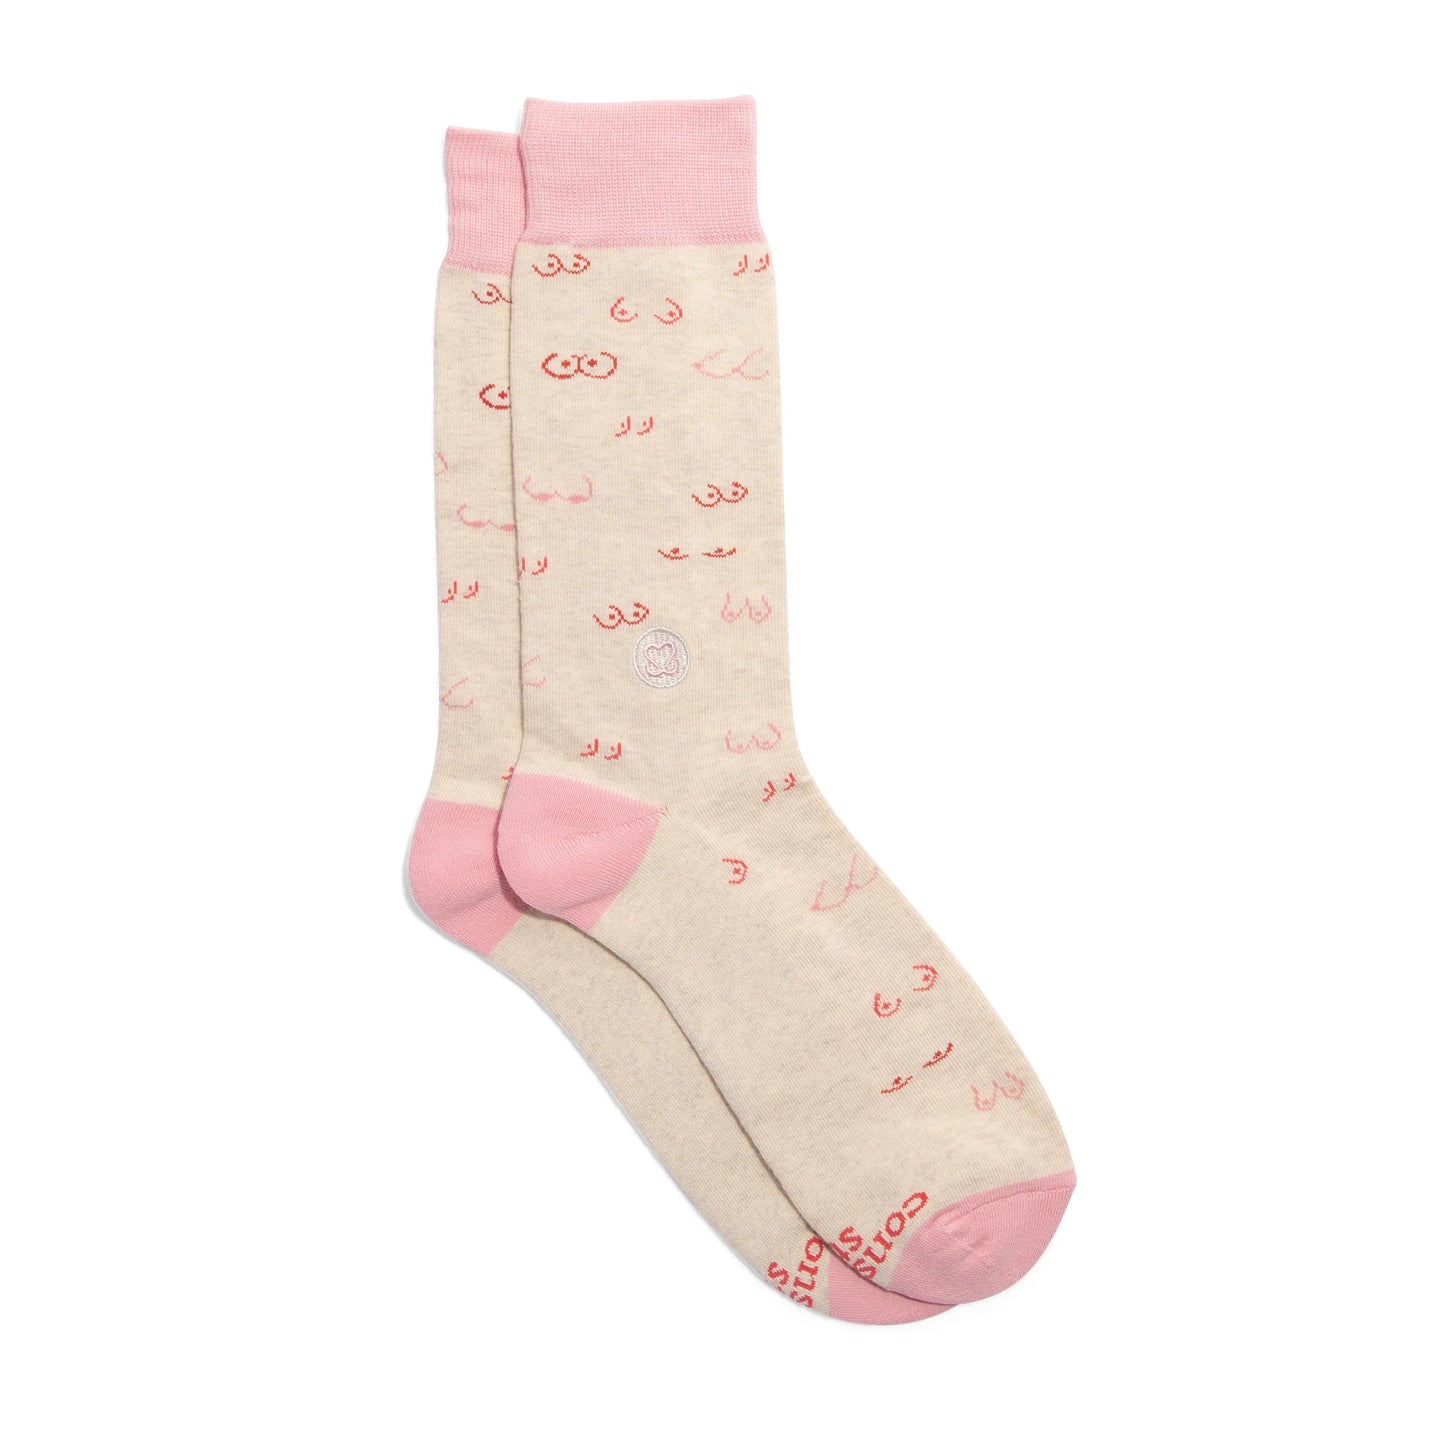 Socks that Support Breast Cancer Prevention